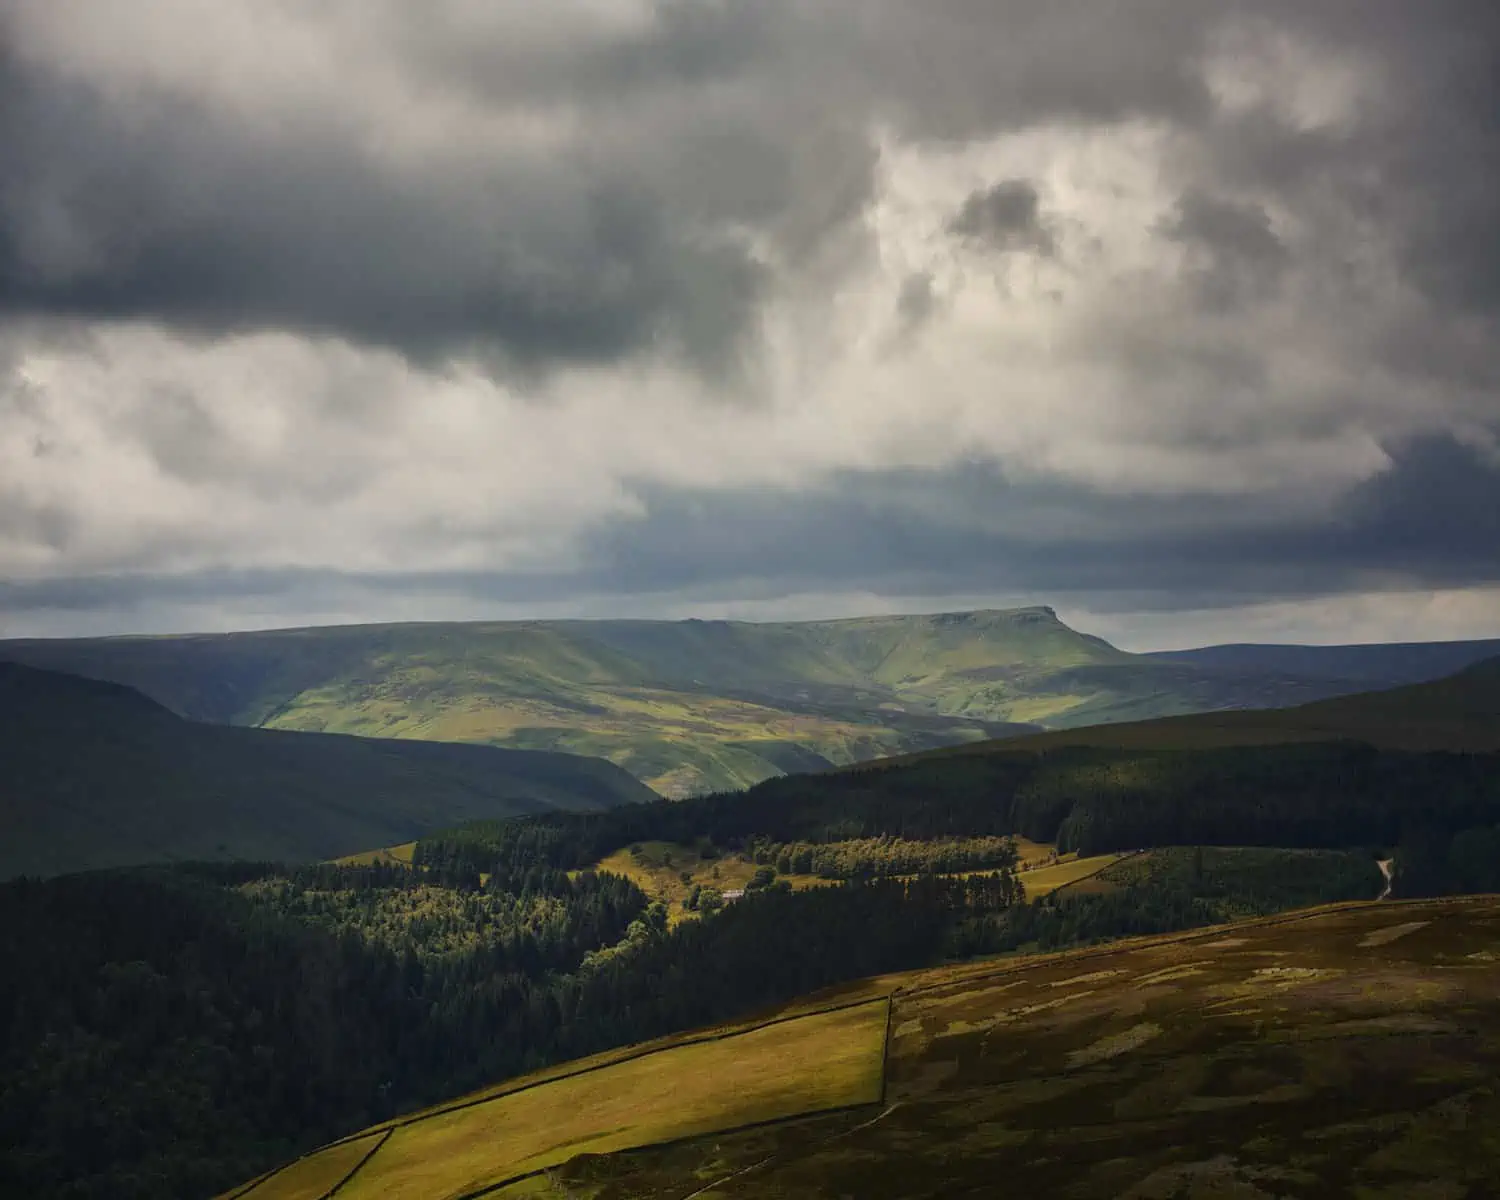 ID: A landscape image. A dark, moody scene with dramatic shadows from clouds over the moorlands. The fields and hills almost look like velvet. We see greens, browns and blues in this scene with geometric hill shapes in the background.